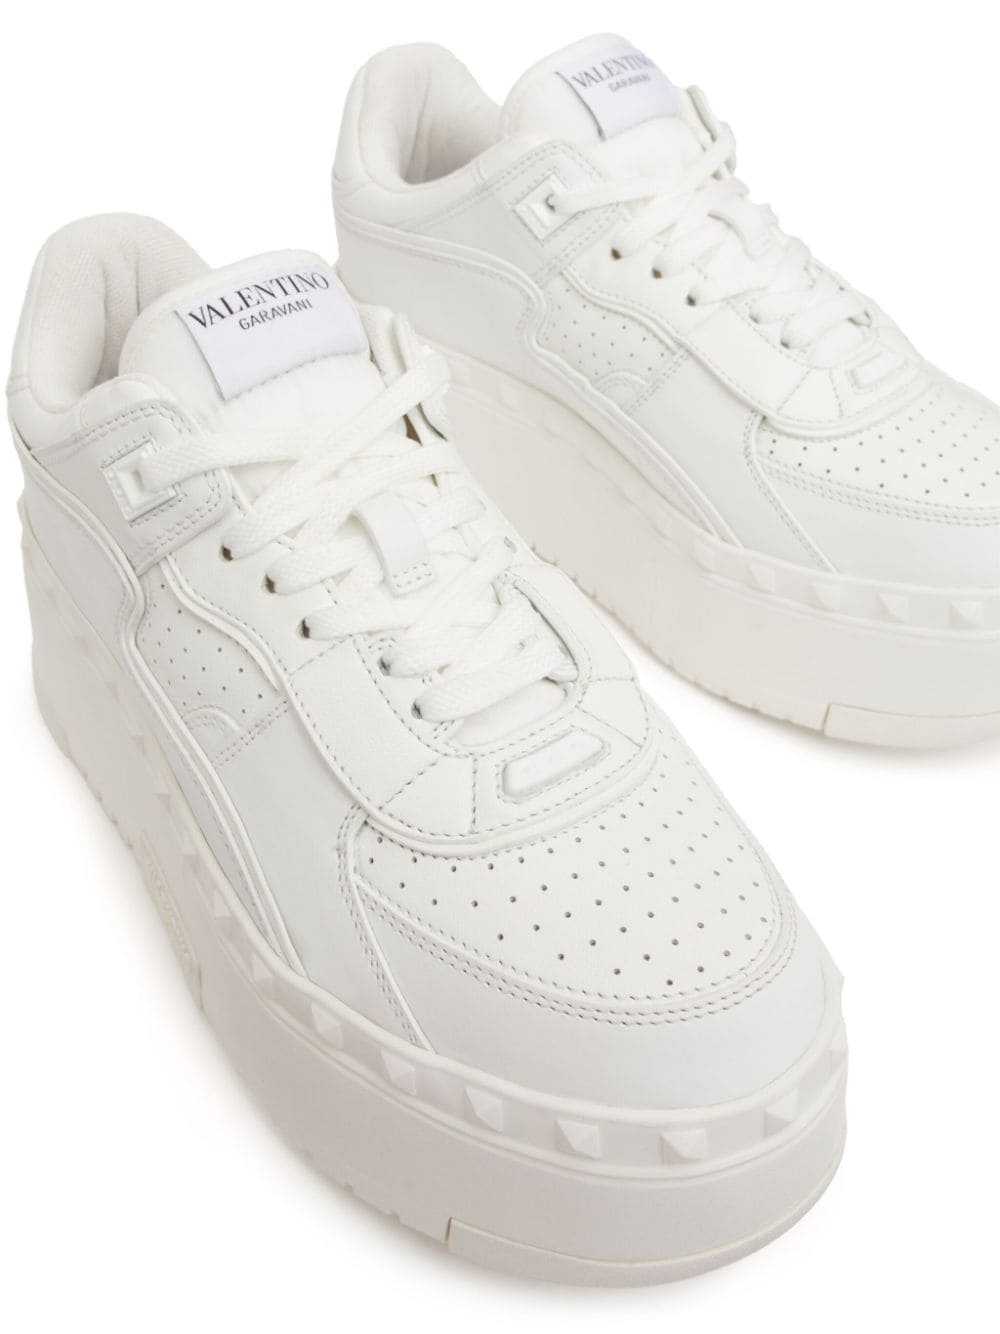 Freedots XL leather sneakers - 5